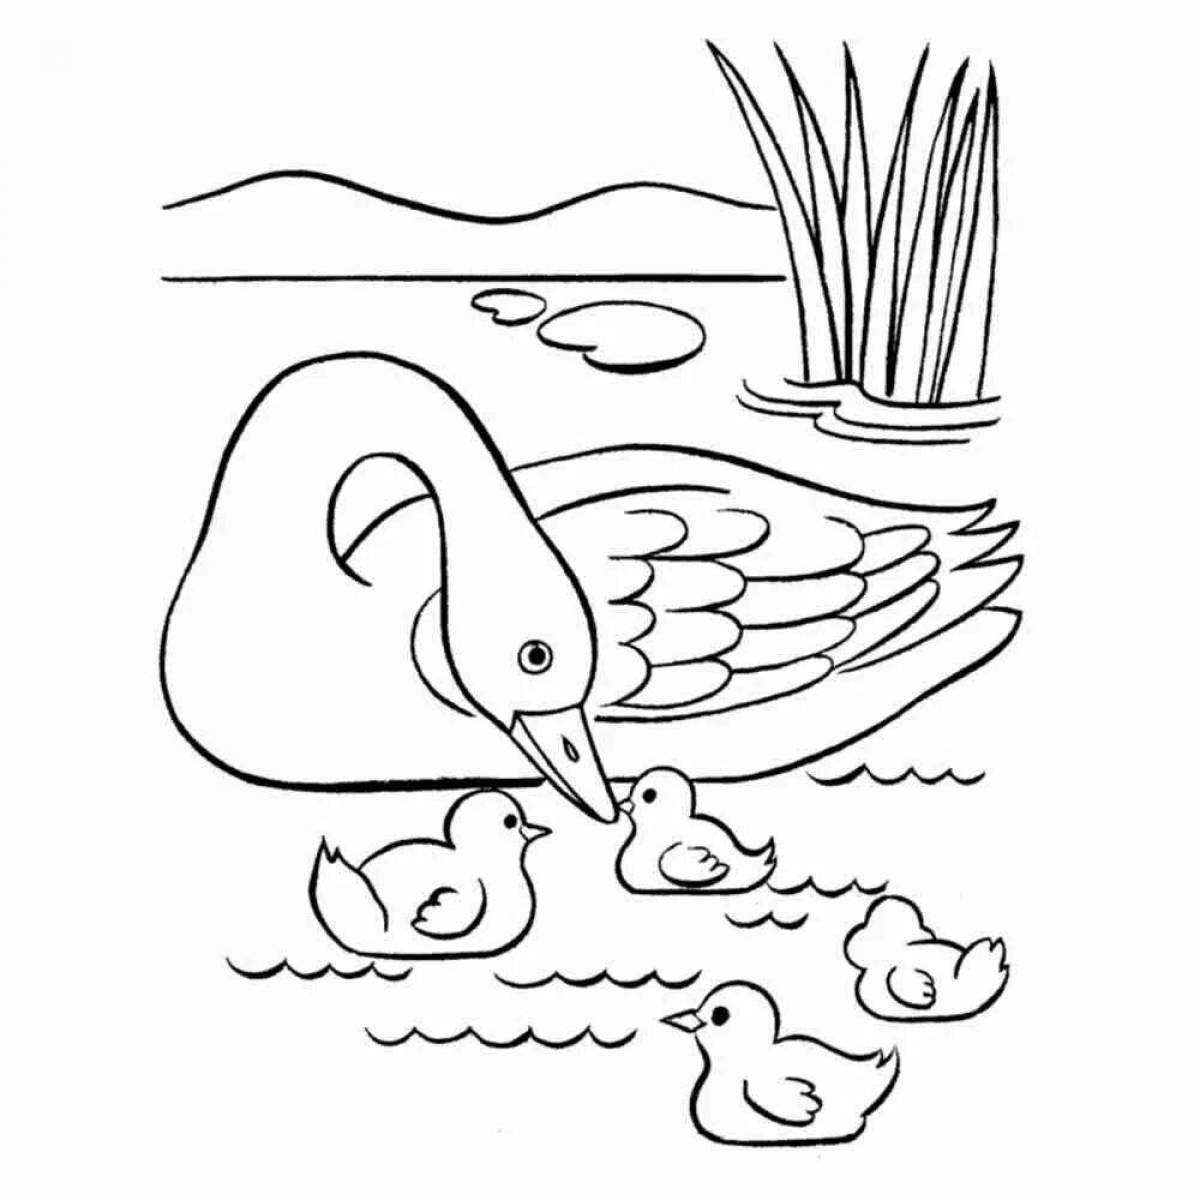 Coloring page blissful duck and duckling